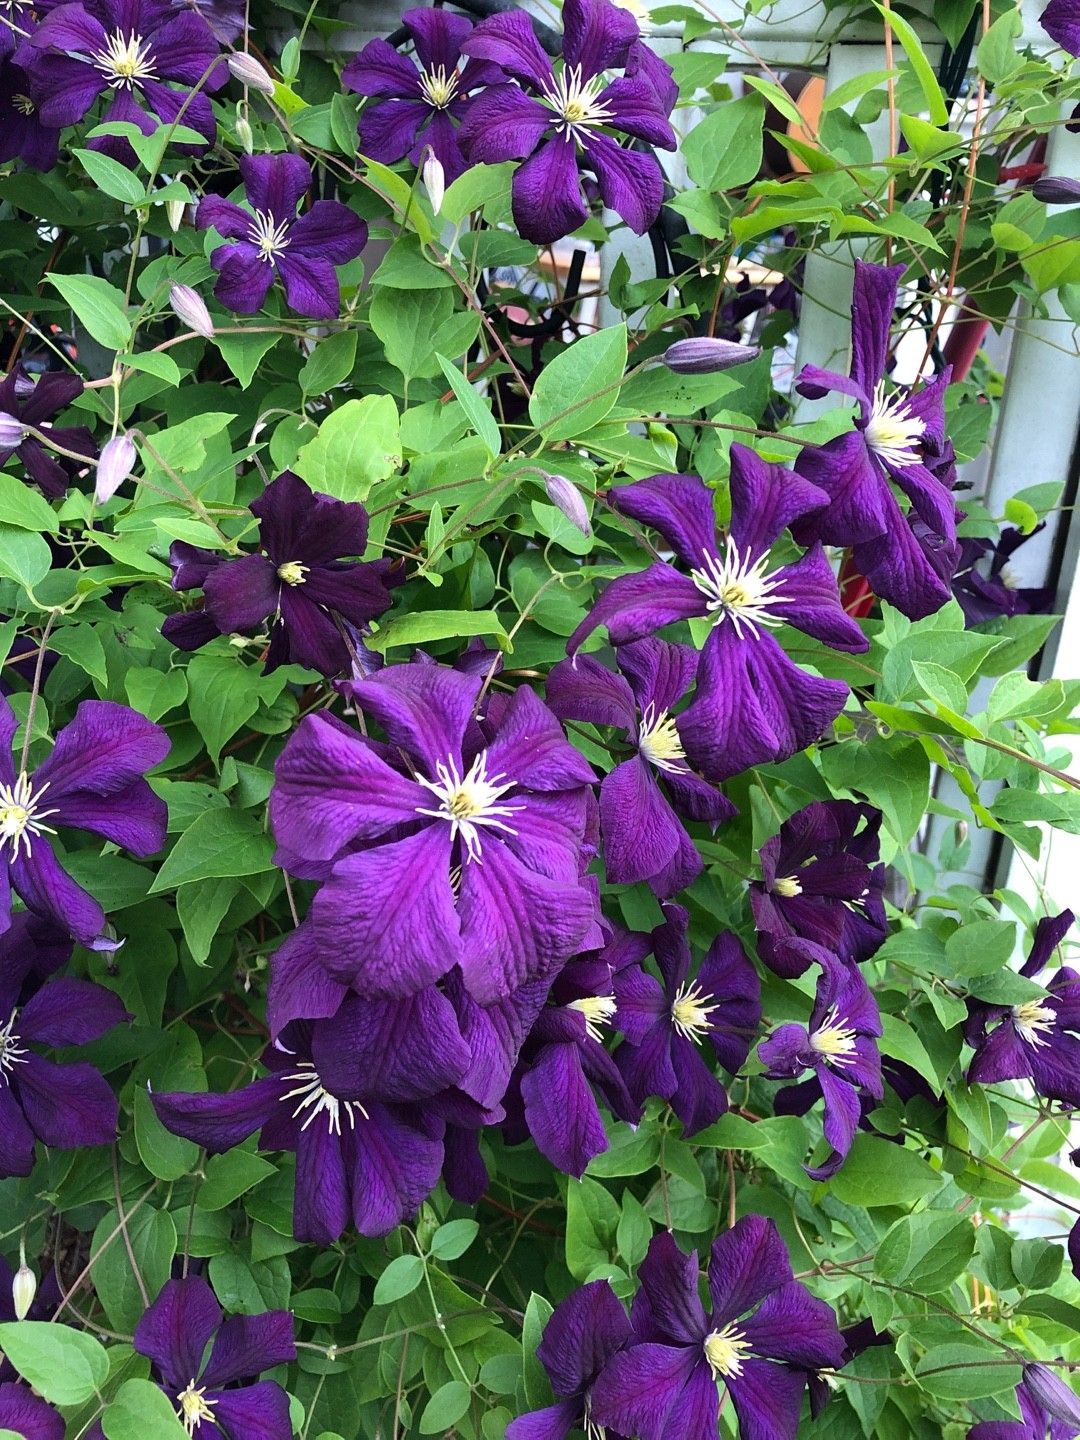 Italian leather flower 'Etoile Violette' Care (Watering, Fertilize,  Pruning, Propagation) - PictureThis